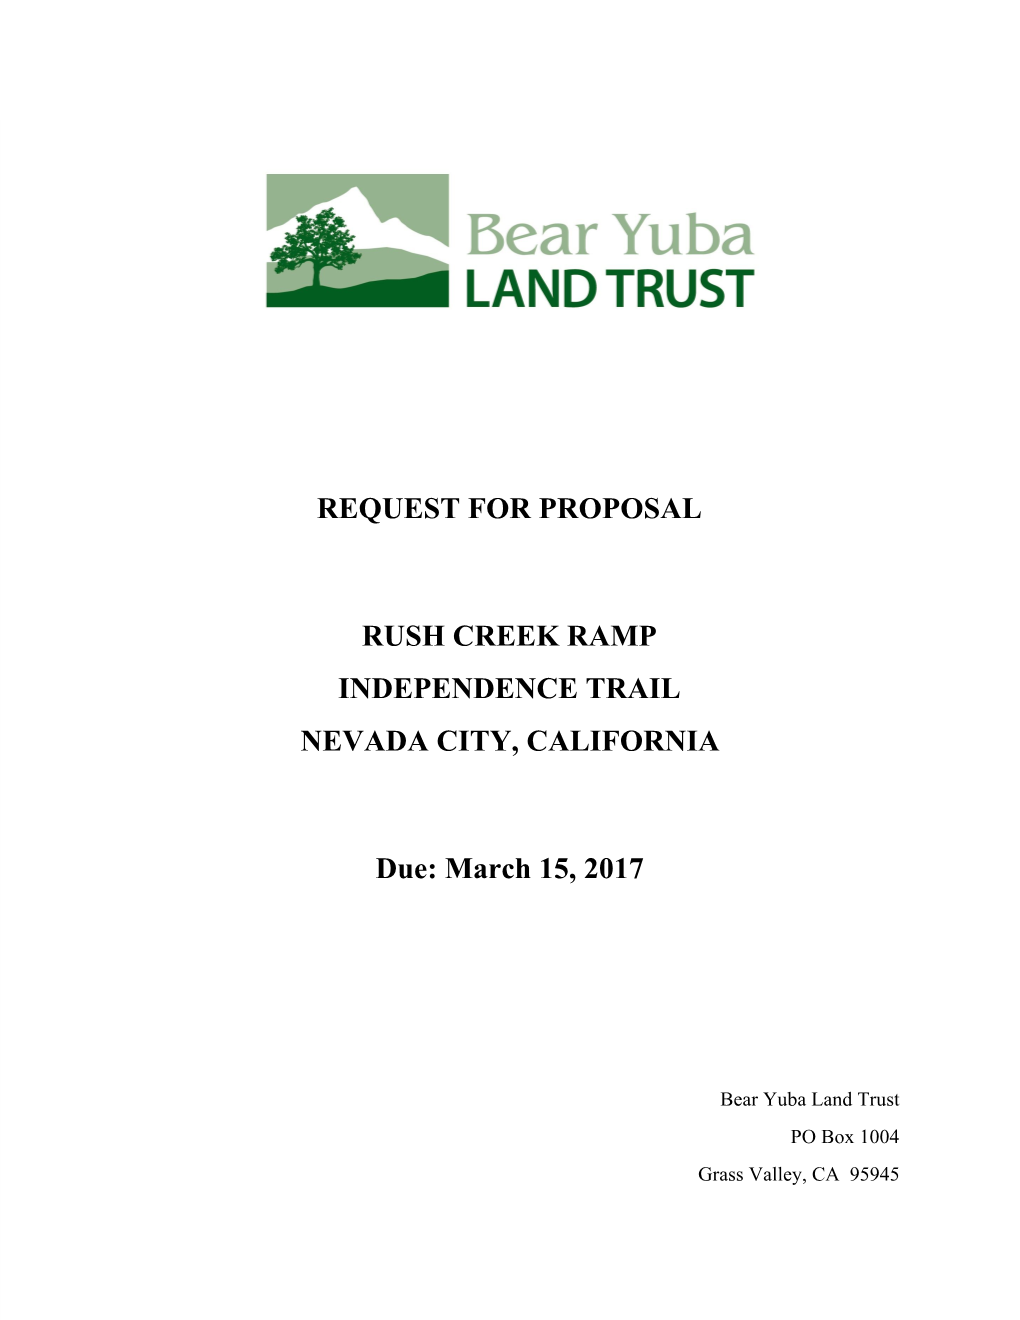 Request for Proposal Rush Creek Ramp Independence